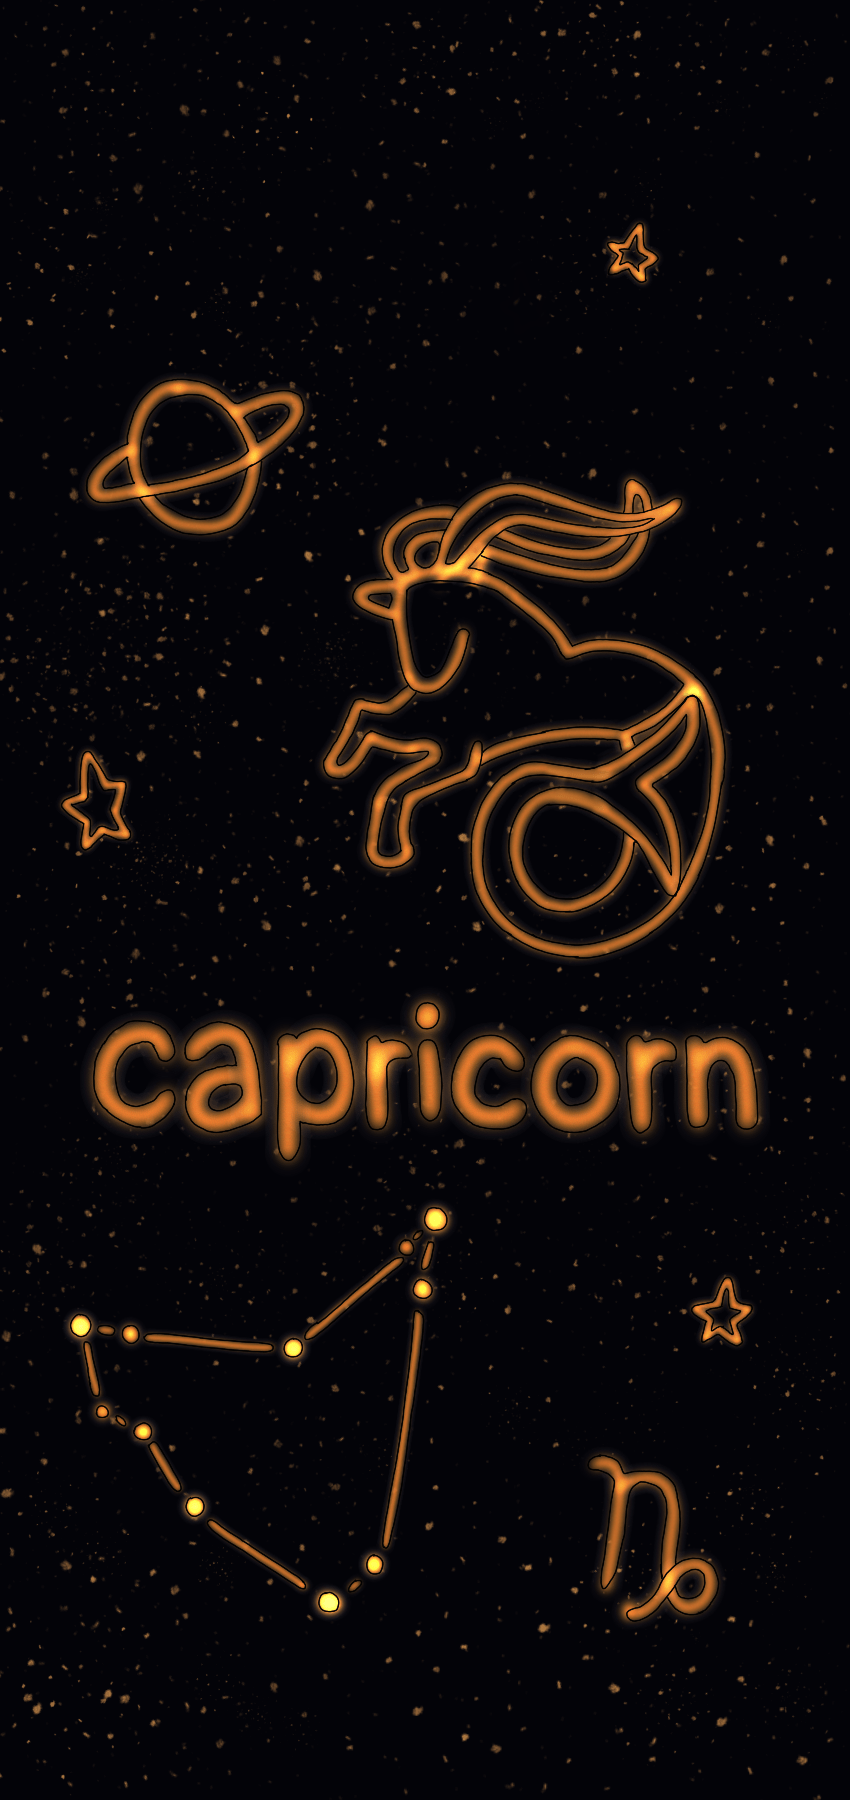 A poster with the zodiac sign of capricorn - Capricorn